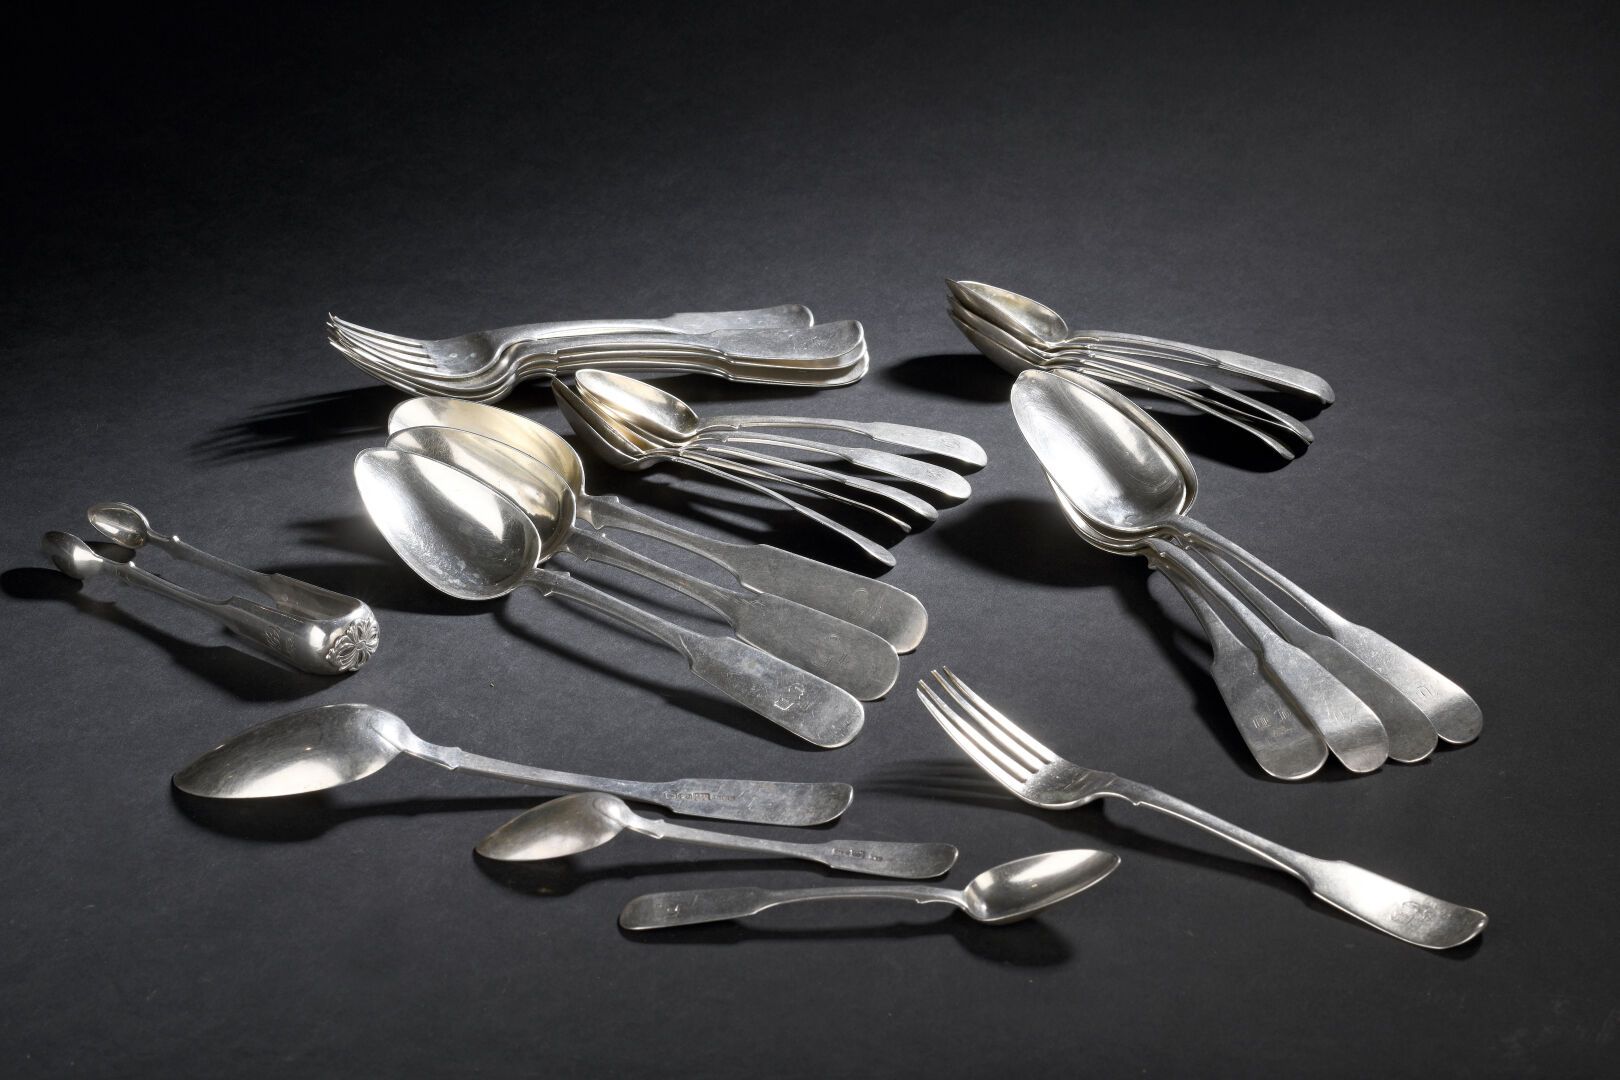 Null Set of five silver flatware and one fork, Moscow 1846
The spatula is crowne&hellip;